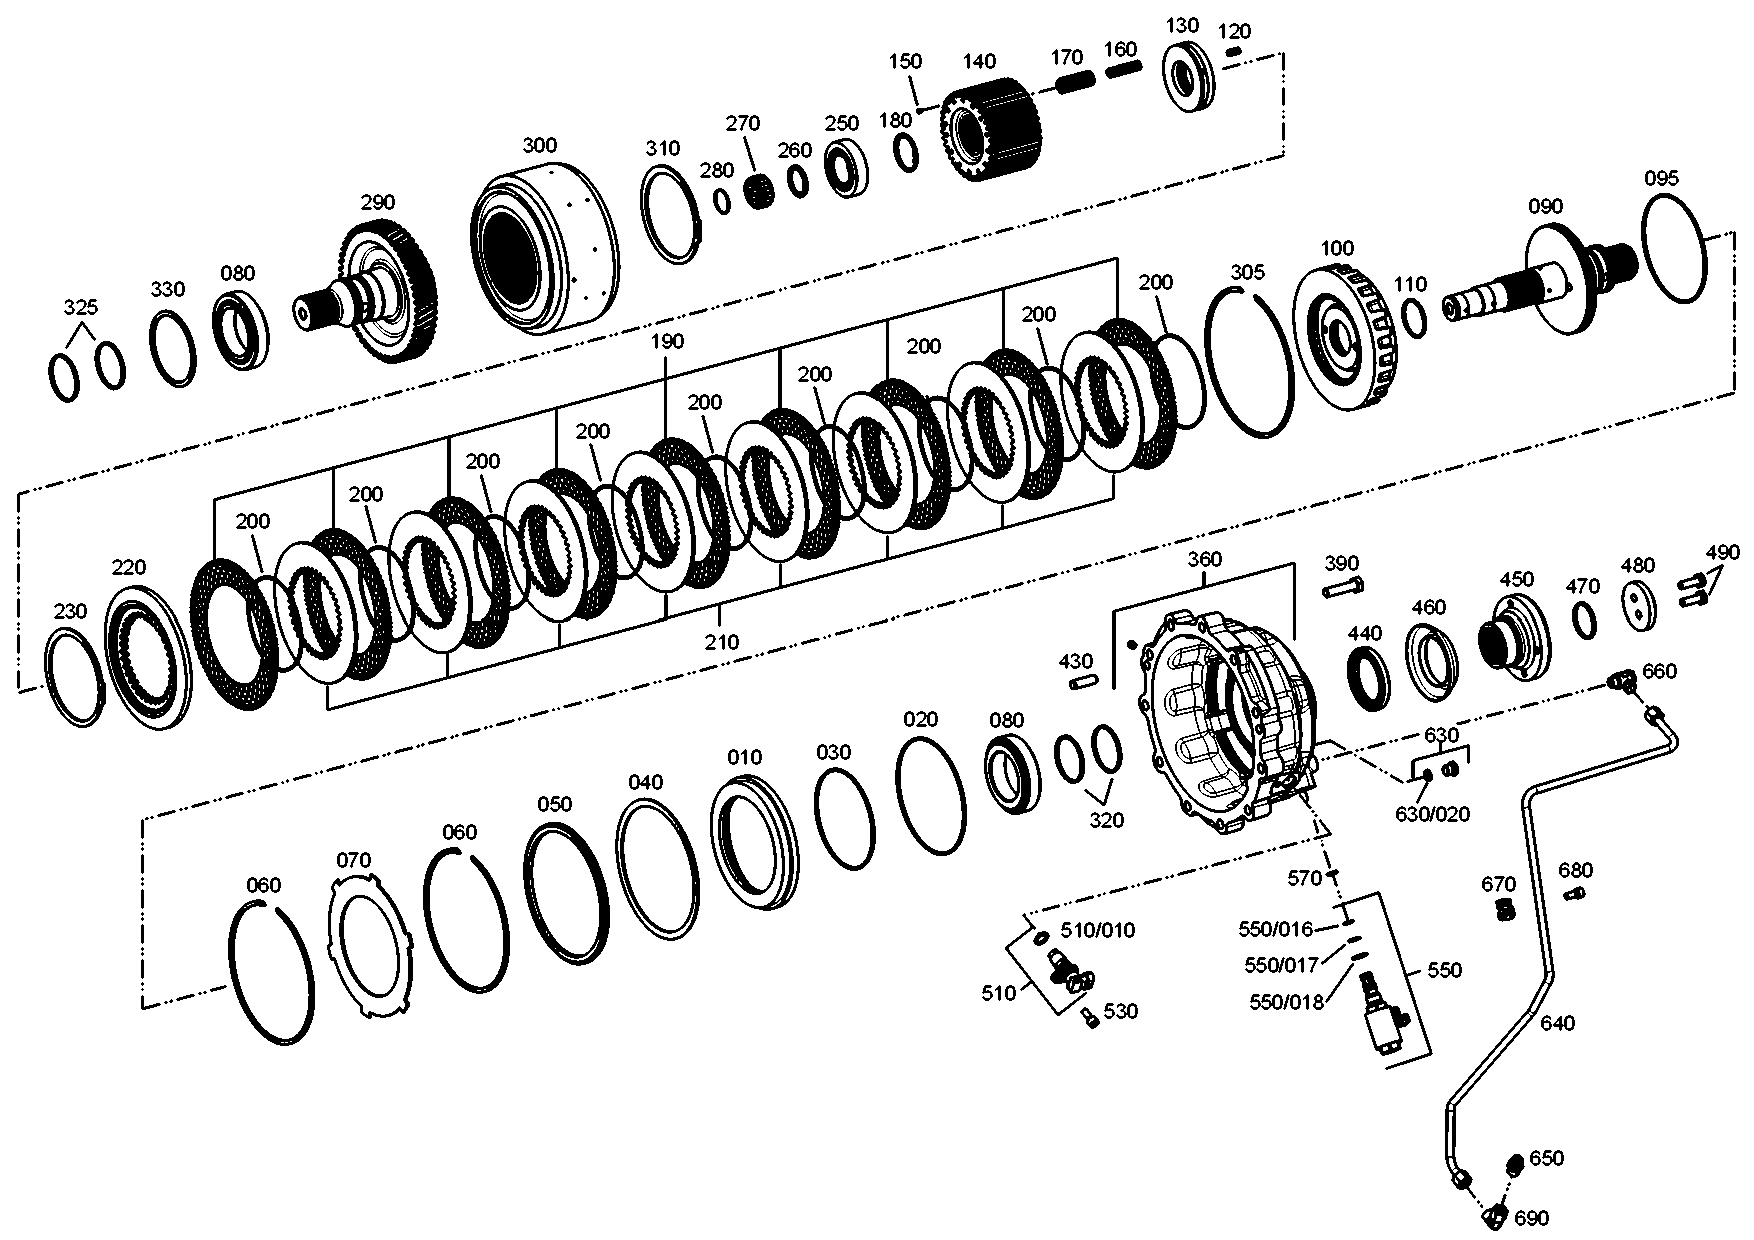 drawing for SENNEBOGEN HYDRAULIKBAGGER GMBH 007898 - SNAP RING (figure 4)